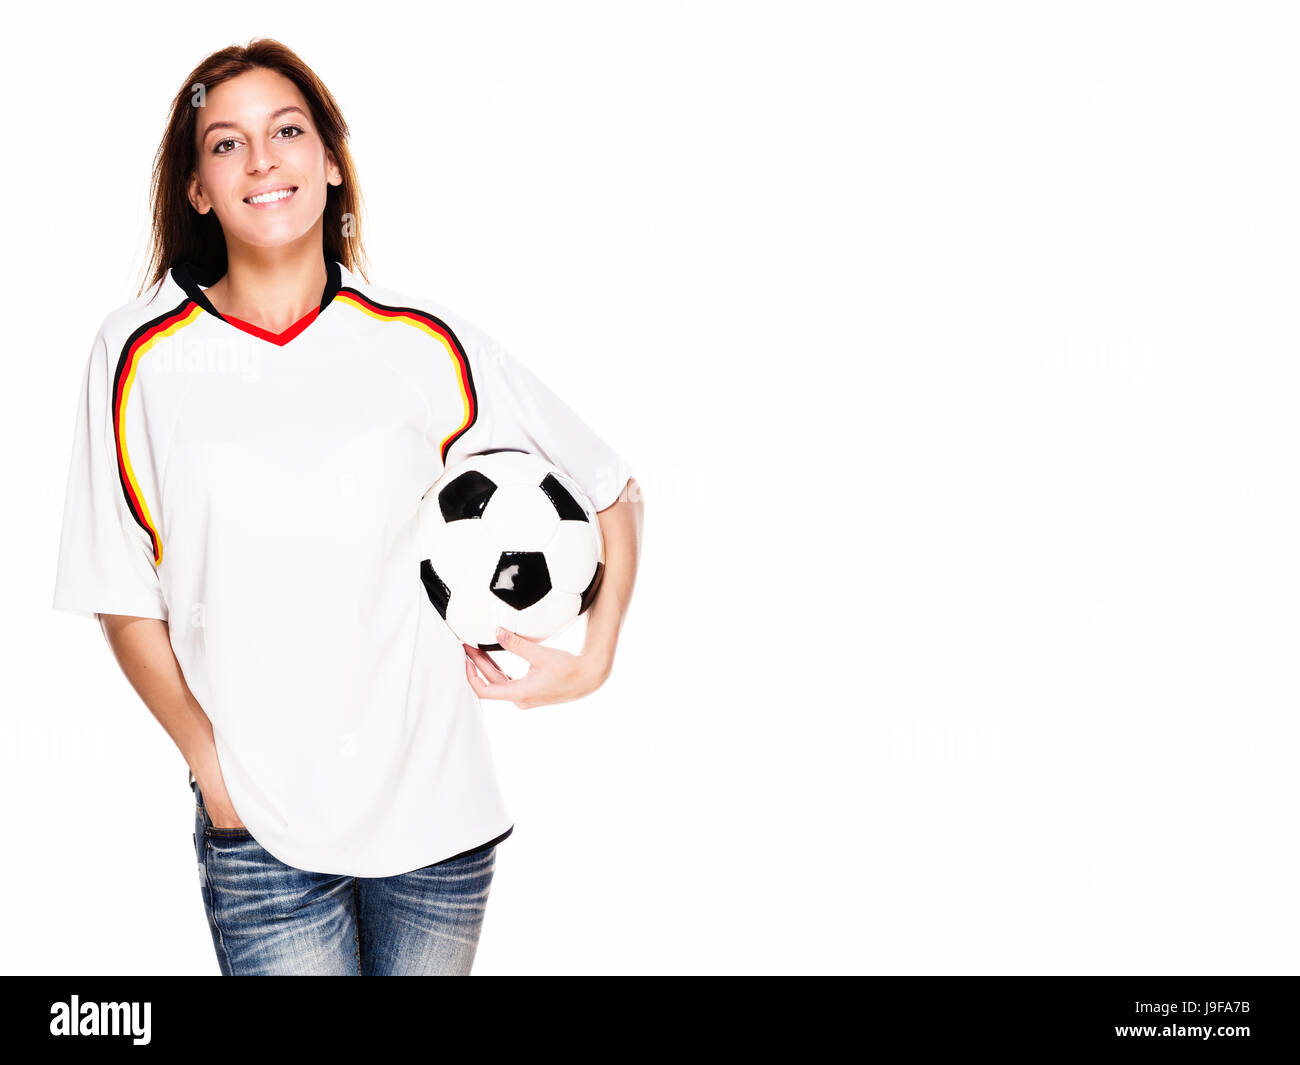 happy young woman with football wearing jersey Stock Photo